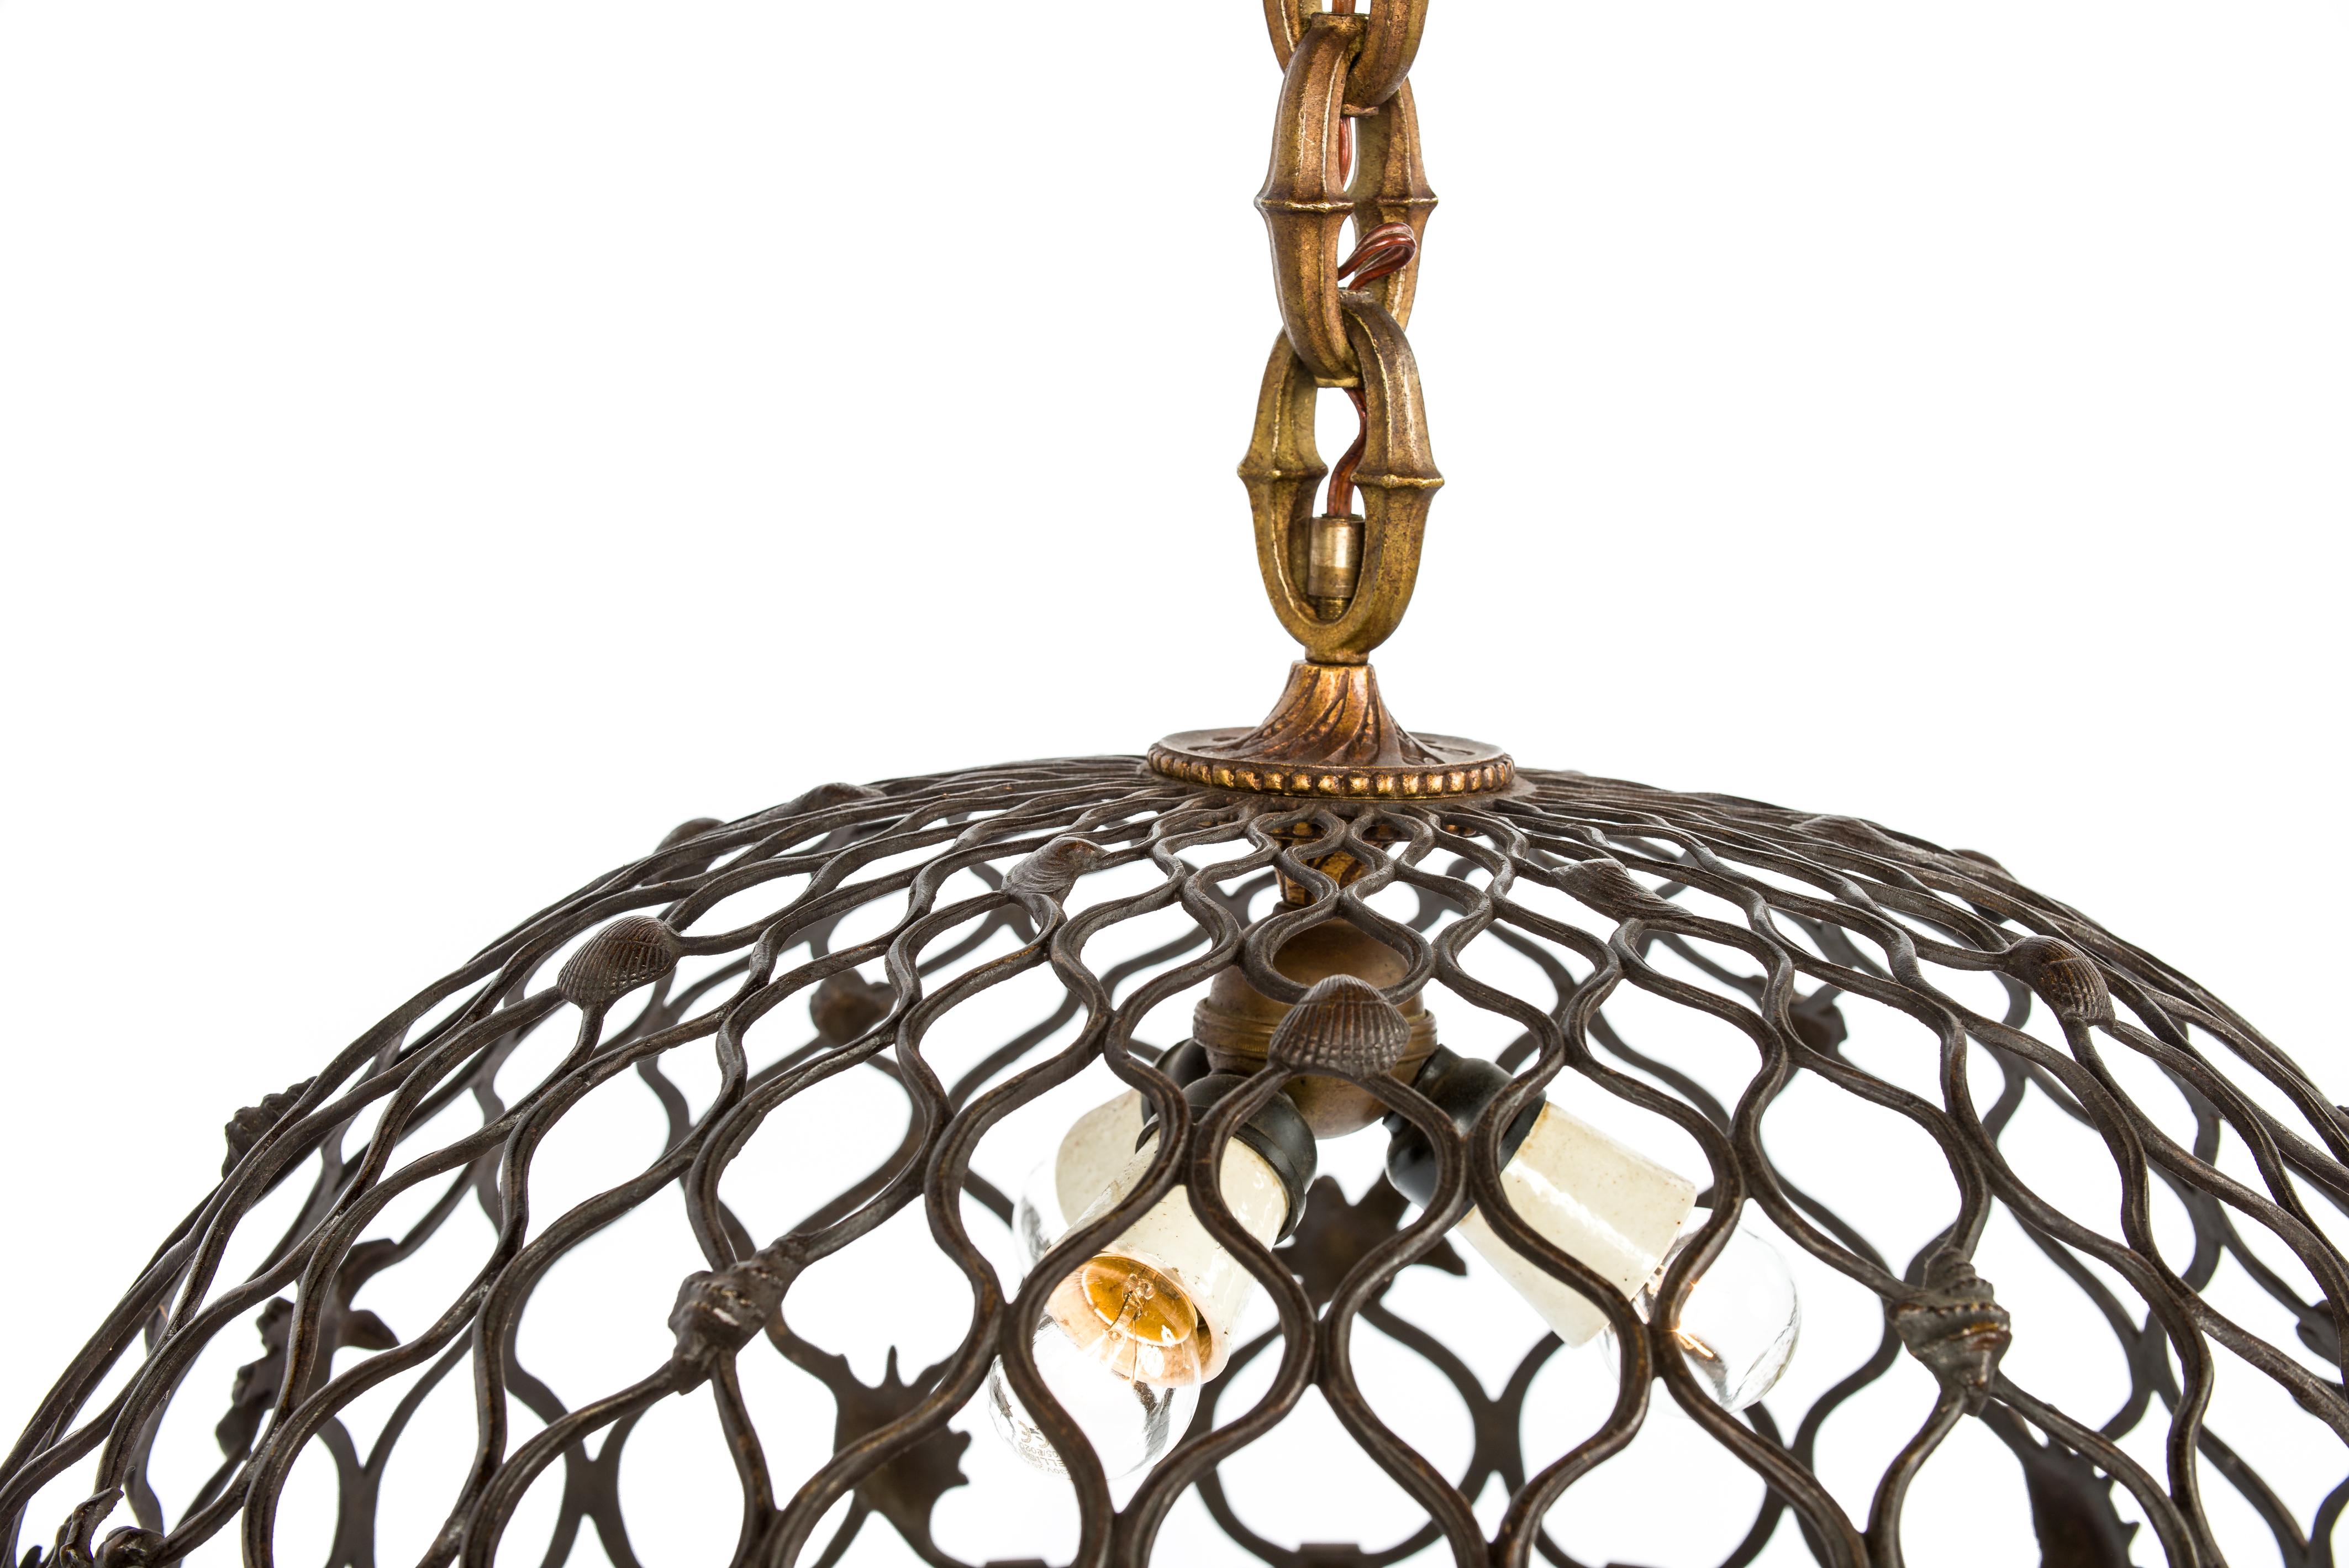 This beautiful pendant was made in France in the early 20th century, circa 1920. It was cast in bronze and is equipped with three E27 light fixtures. The lamp is designed to resemble a stylized fishing net that is decorated with various shells and